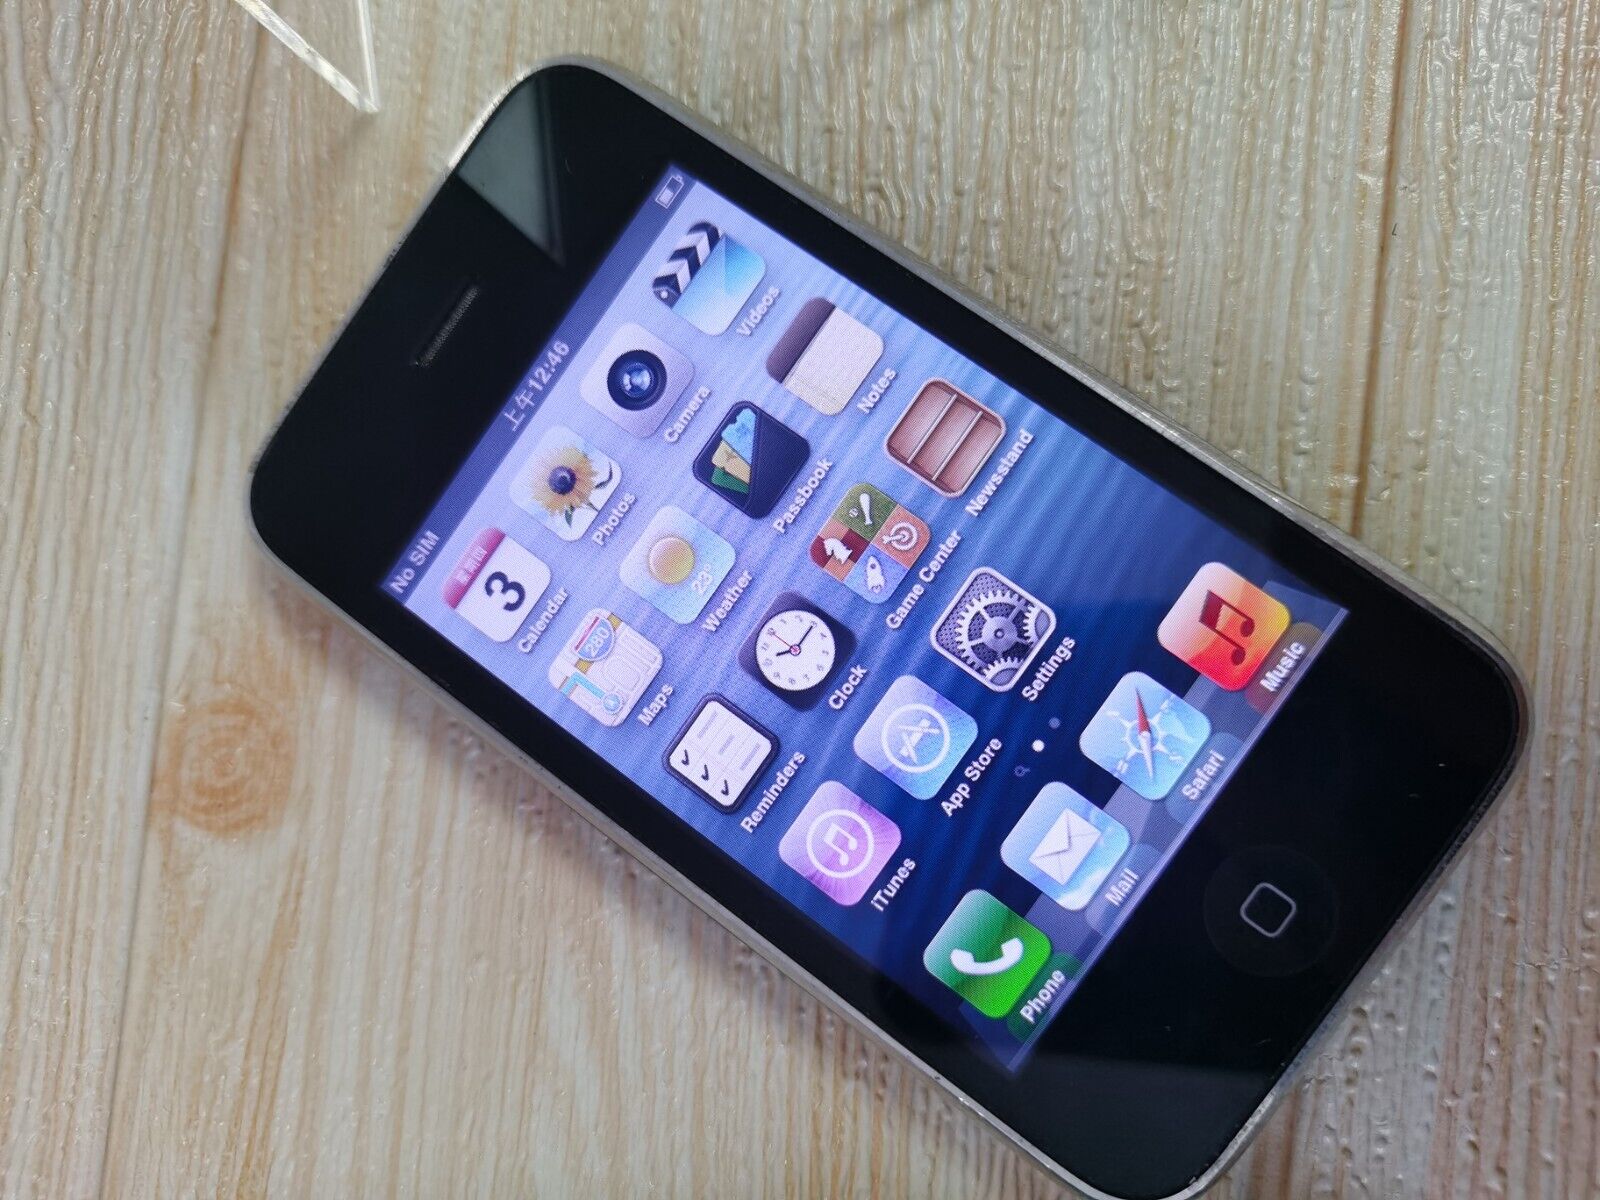 free-iphone-3gs-available-monday-at-best-buy